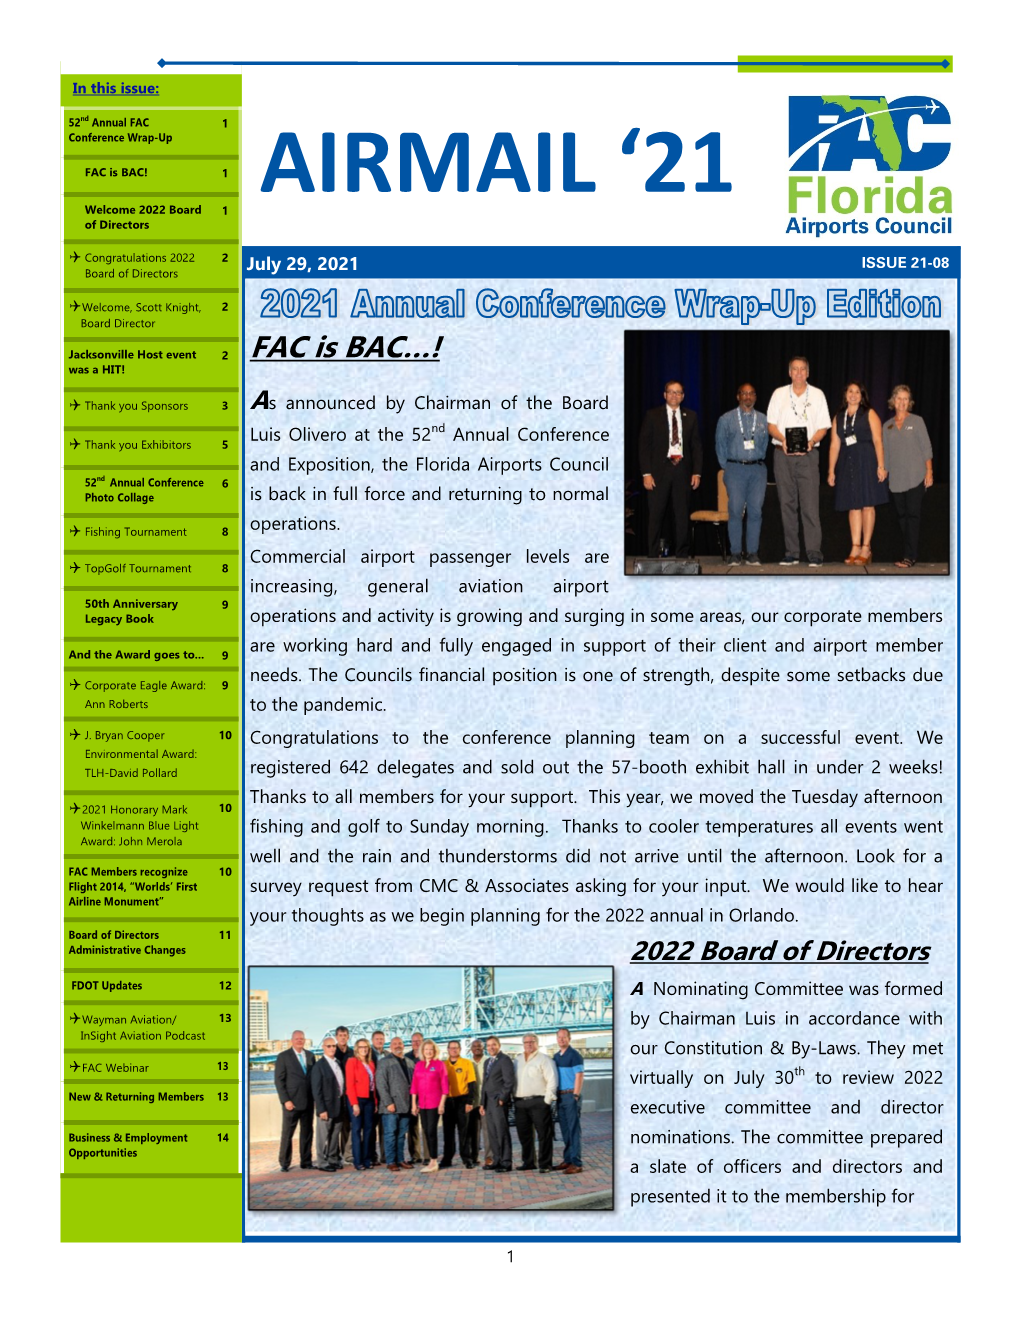 AIRMAIL ‘21 Welcome 2022 Board 1 of Directors